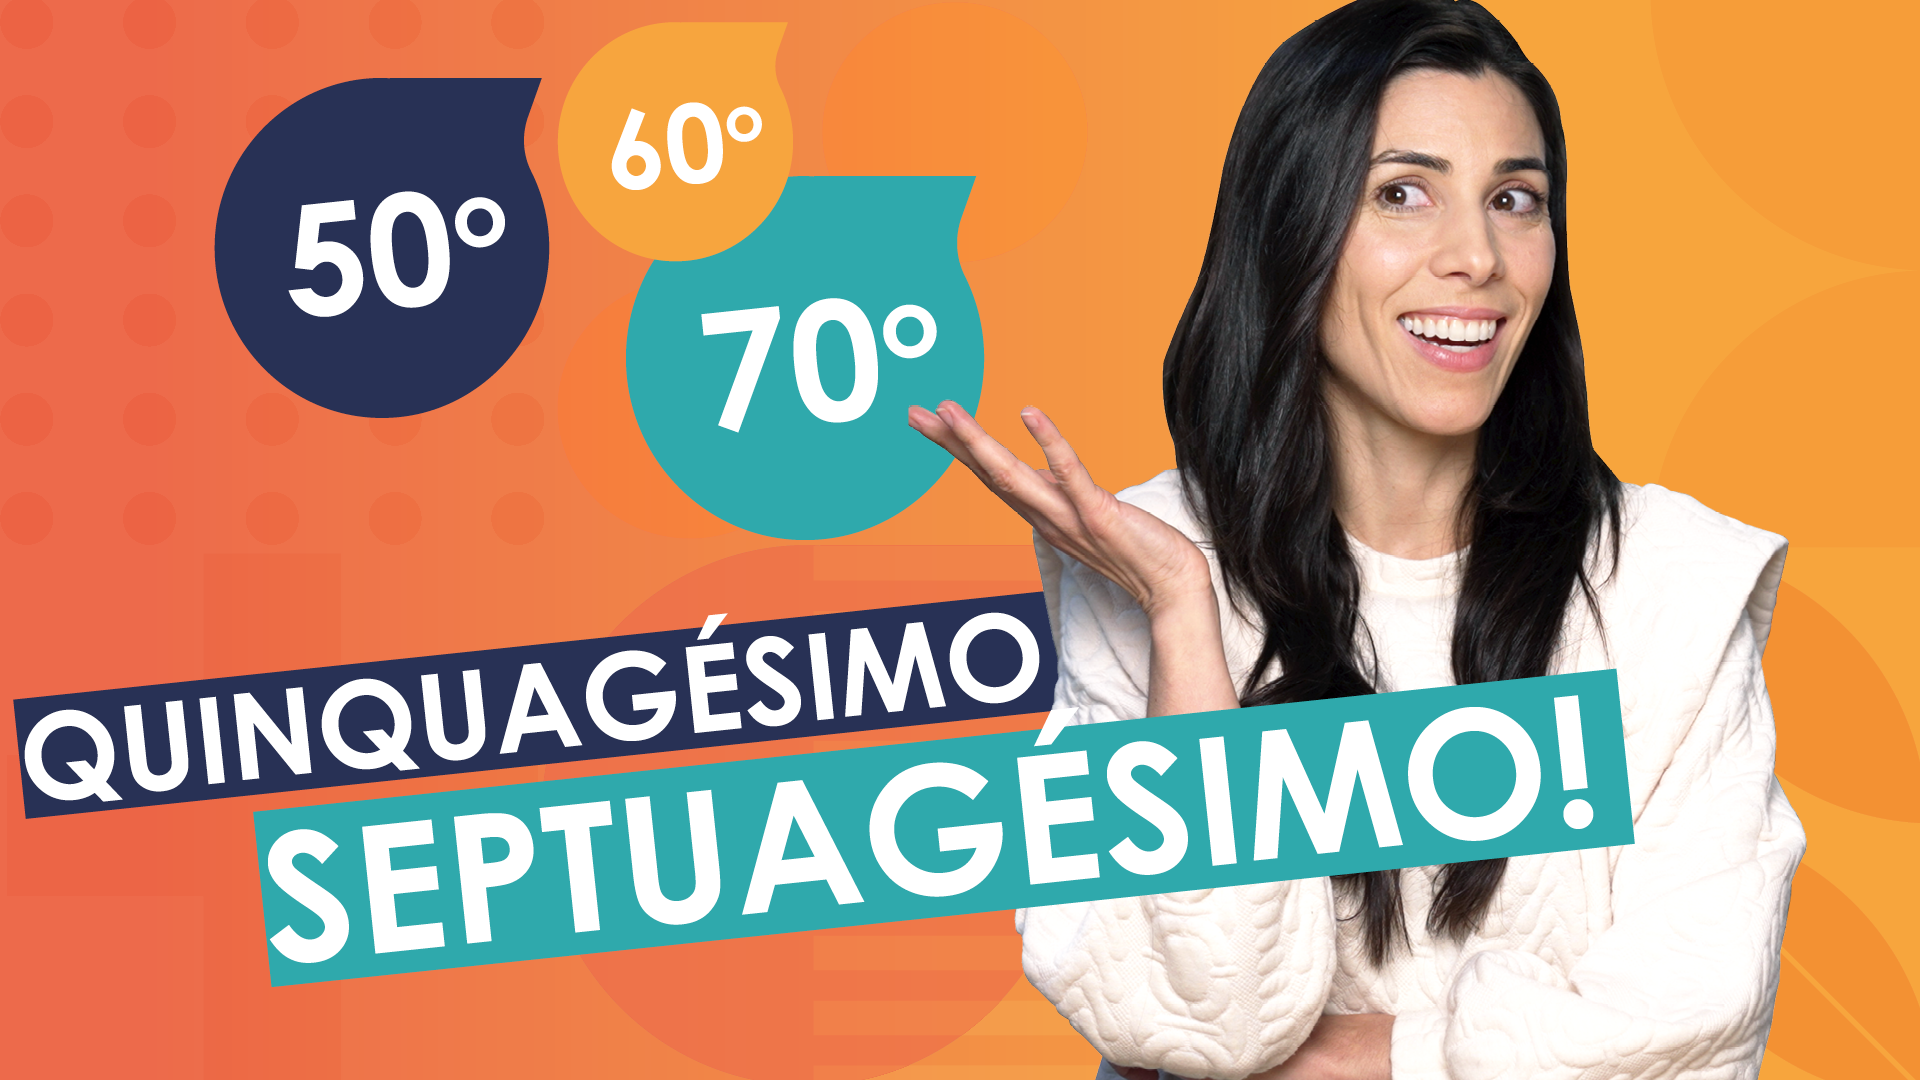 How to Use Ordinal Numbers in Portuguese